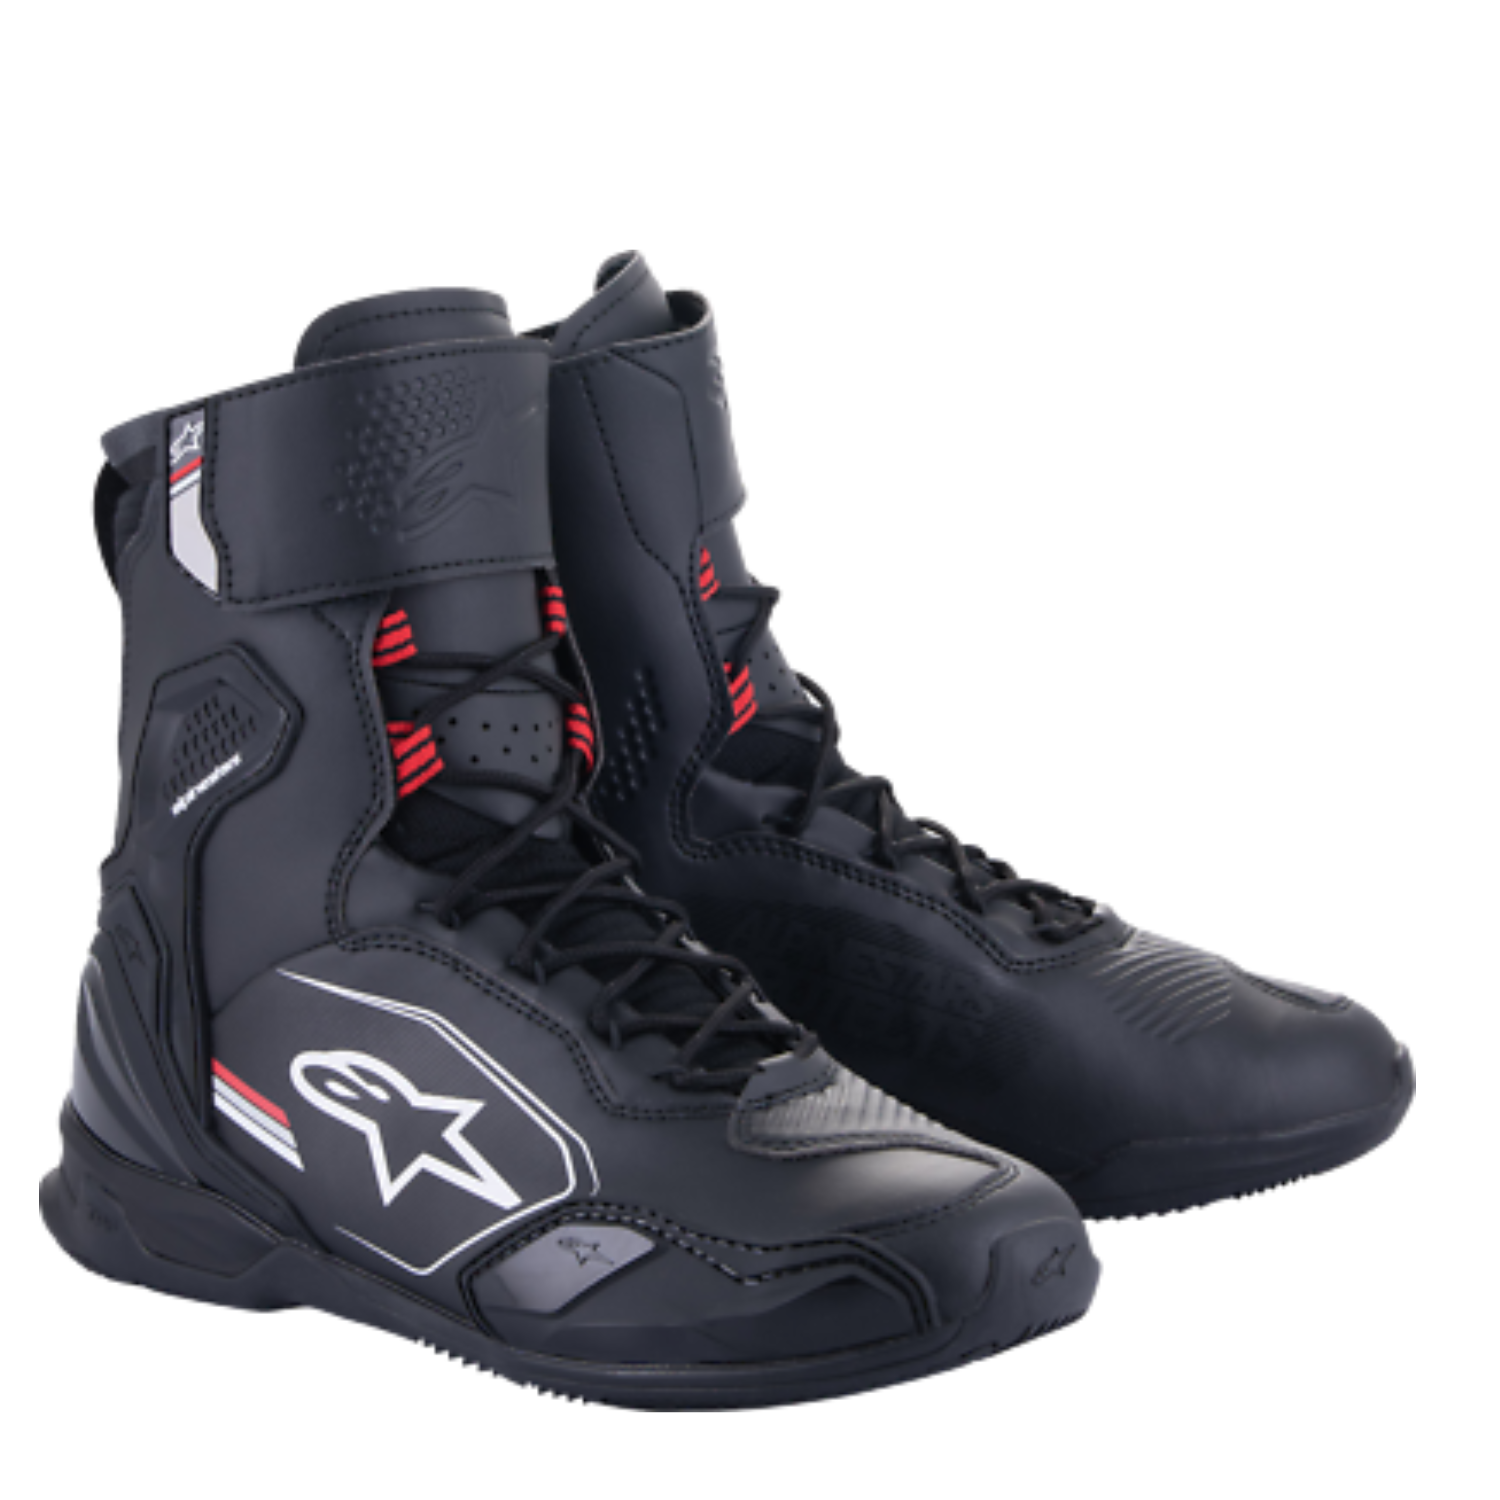 Image of Alpinestars Superfaster Shoes Black Gray Bright Red Taille US 6